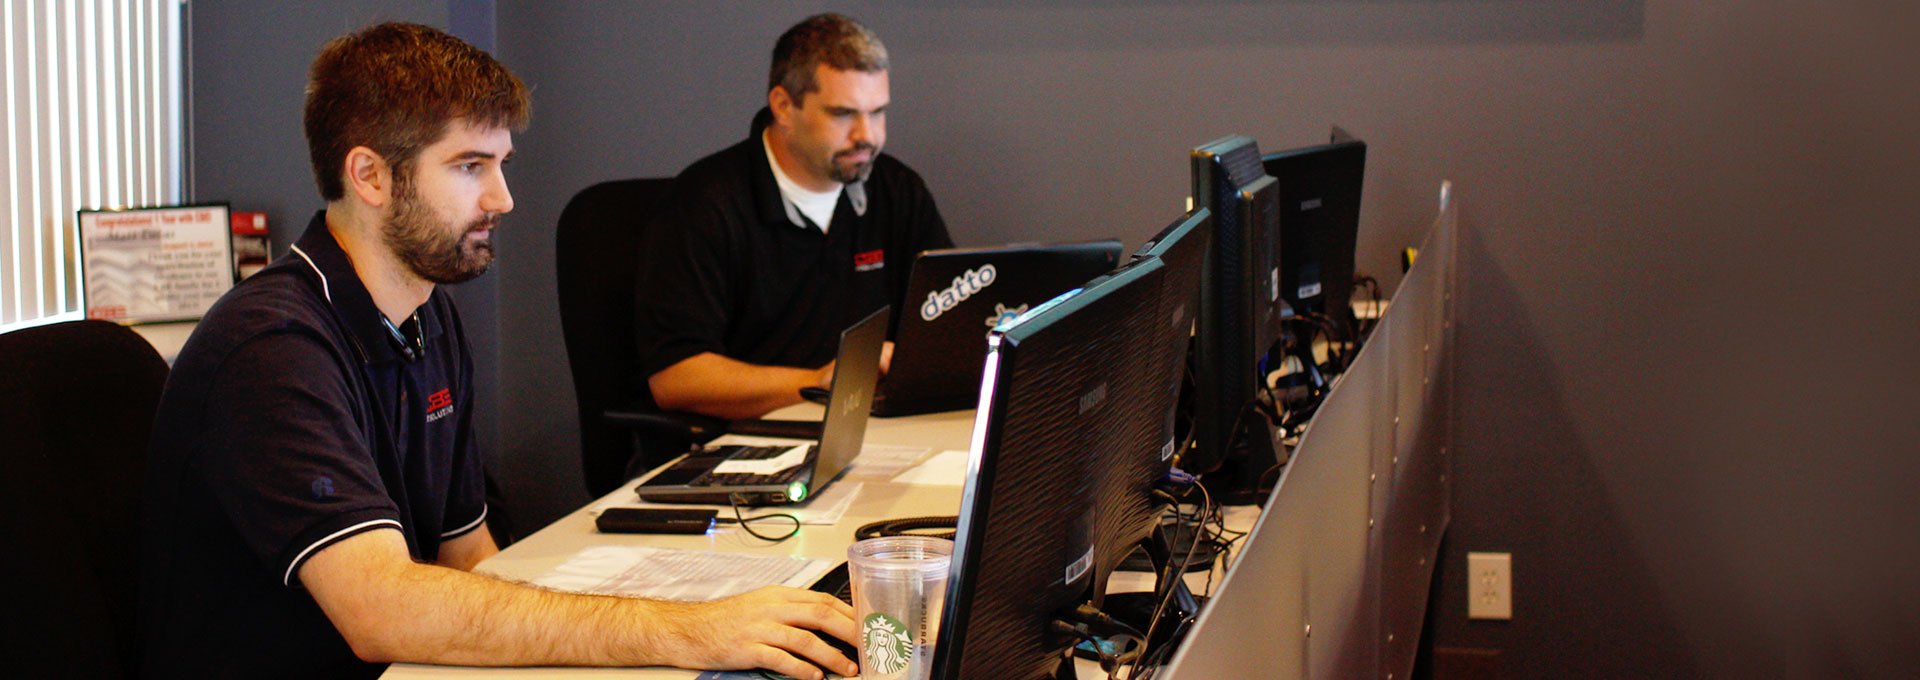 Two Carolina Business Equipment service representatives on their computers